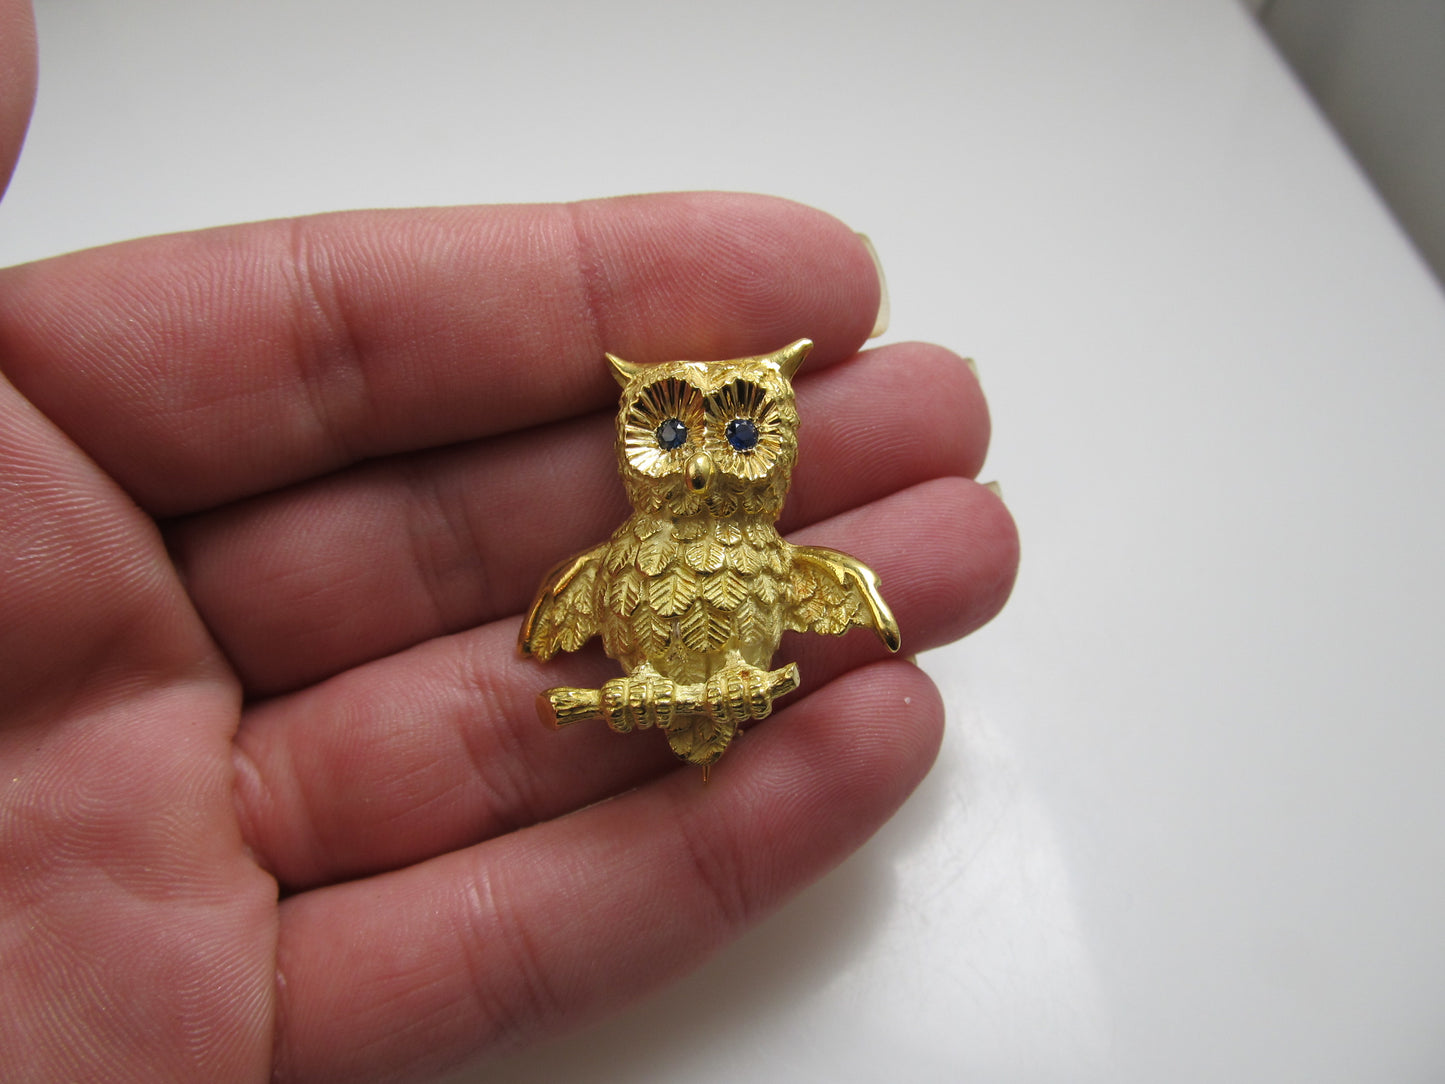 18k yellow gold owl pin with sapphire eyes, signed Soret